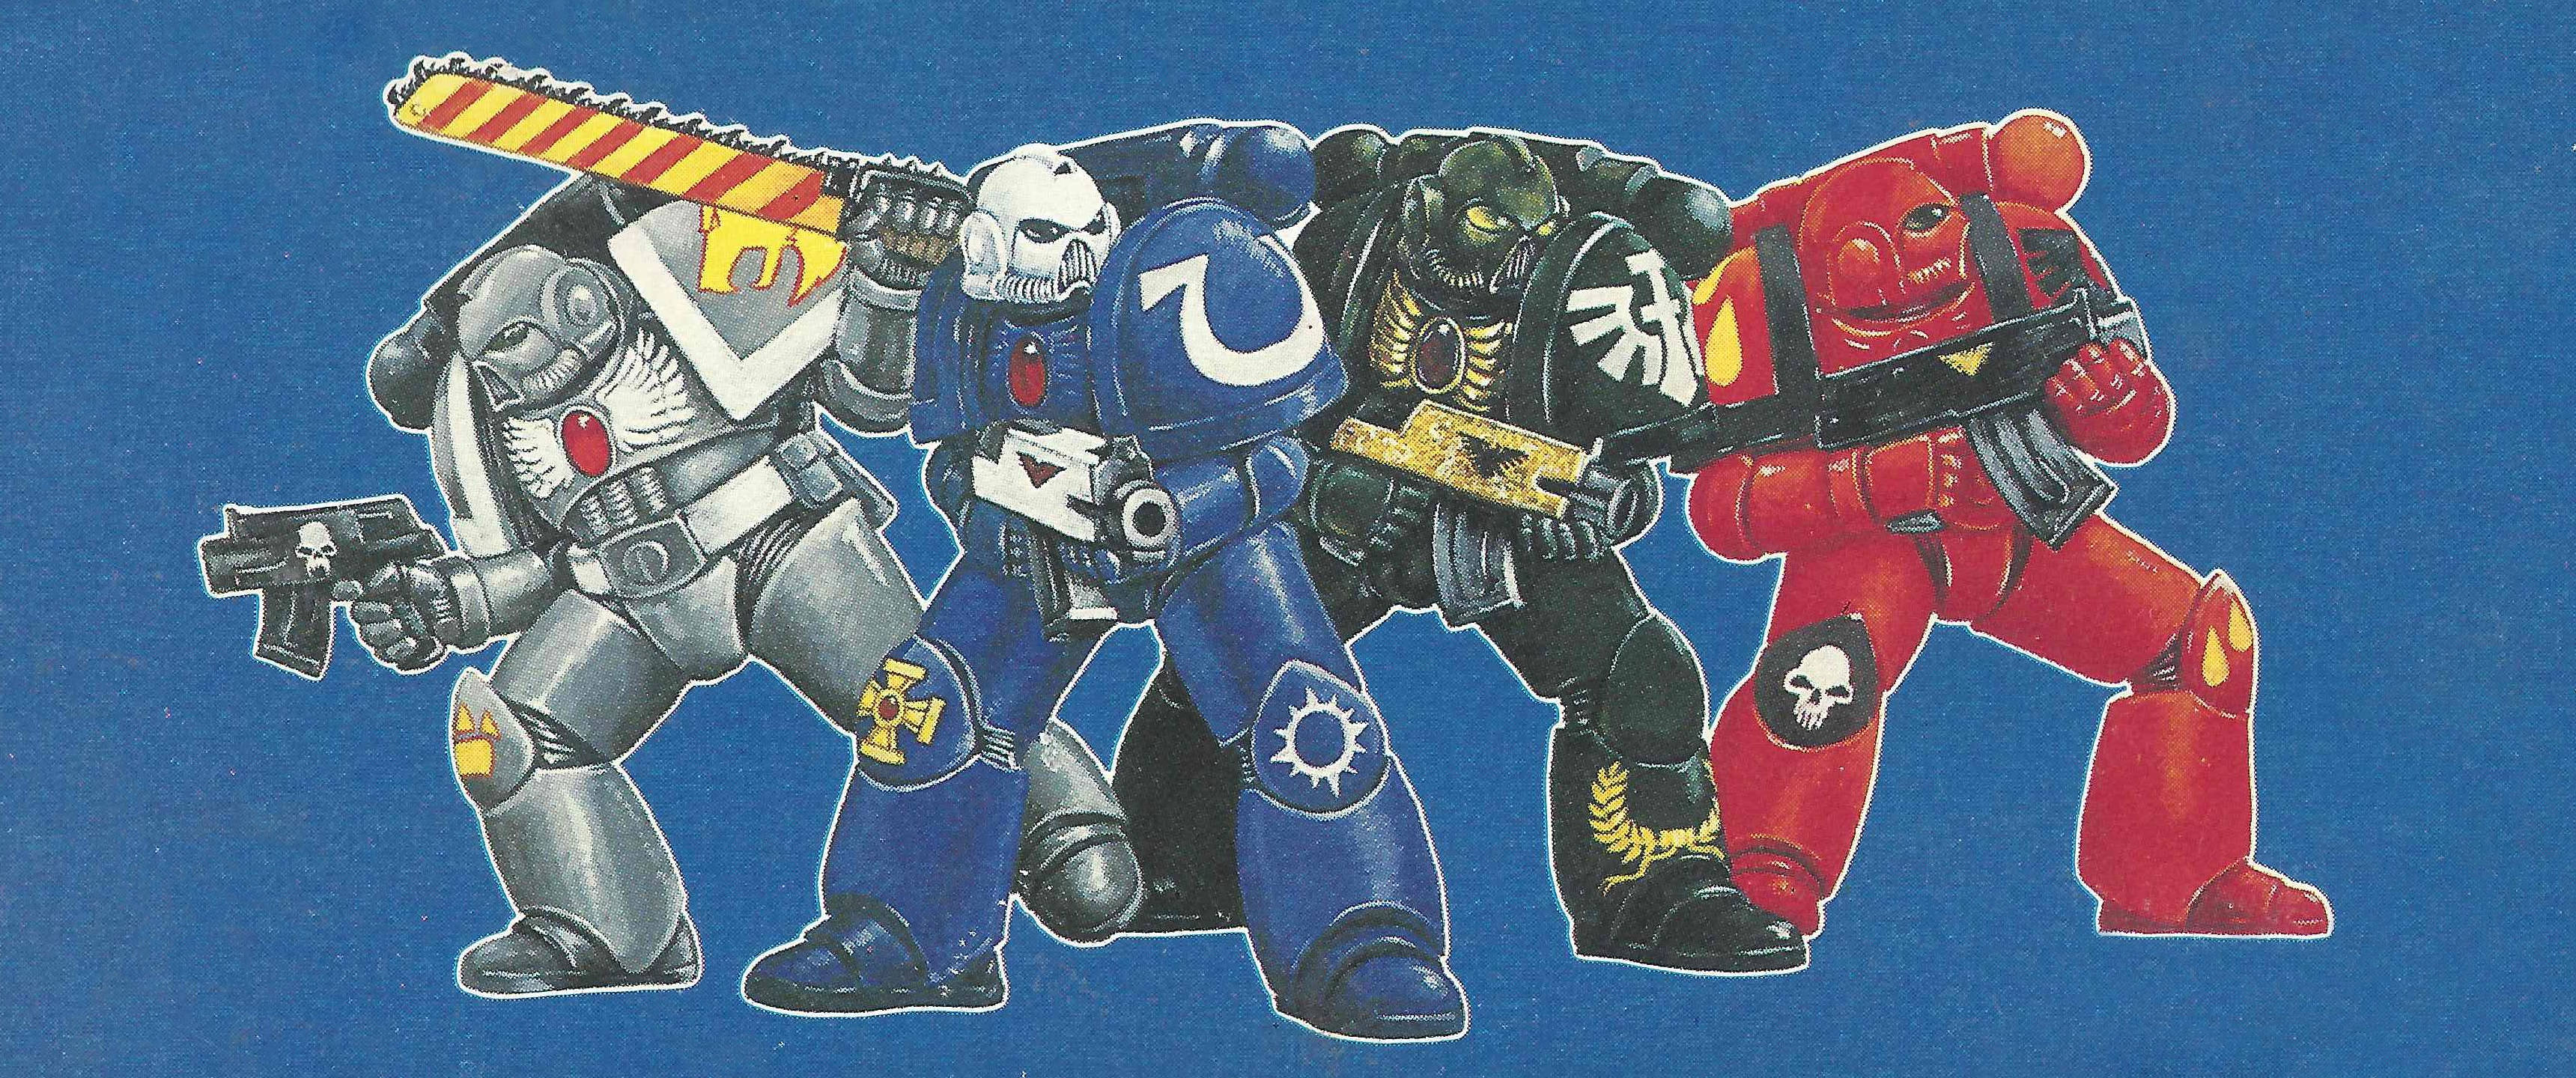 General 3440x1440 Warhammer 40,000 space marines video games video game characters